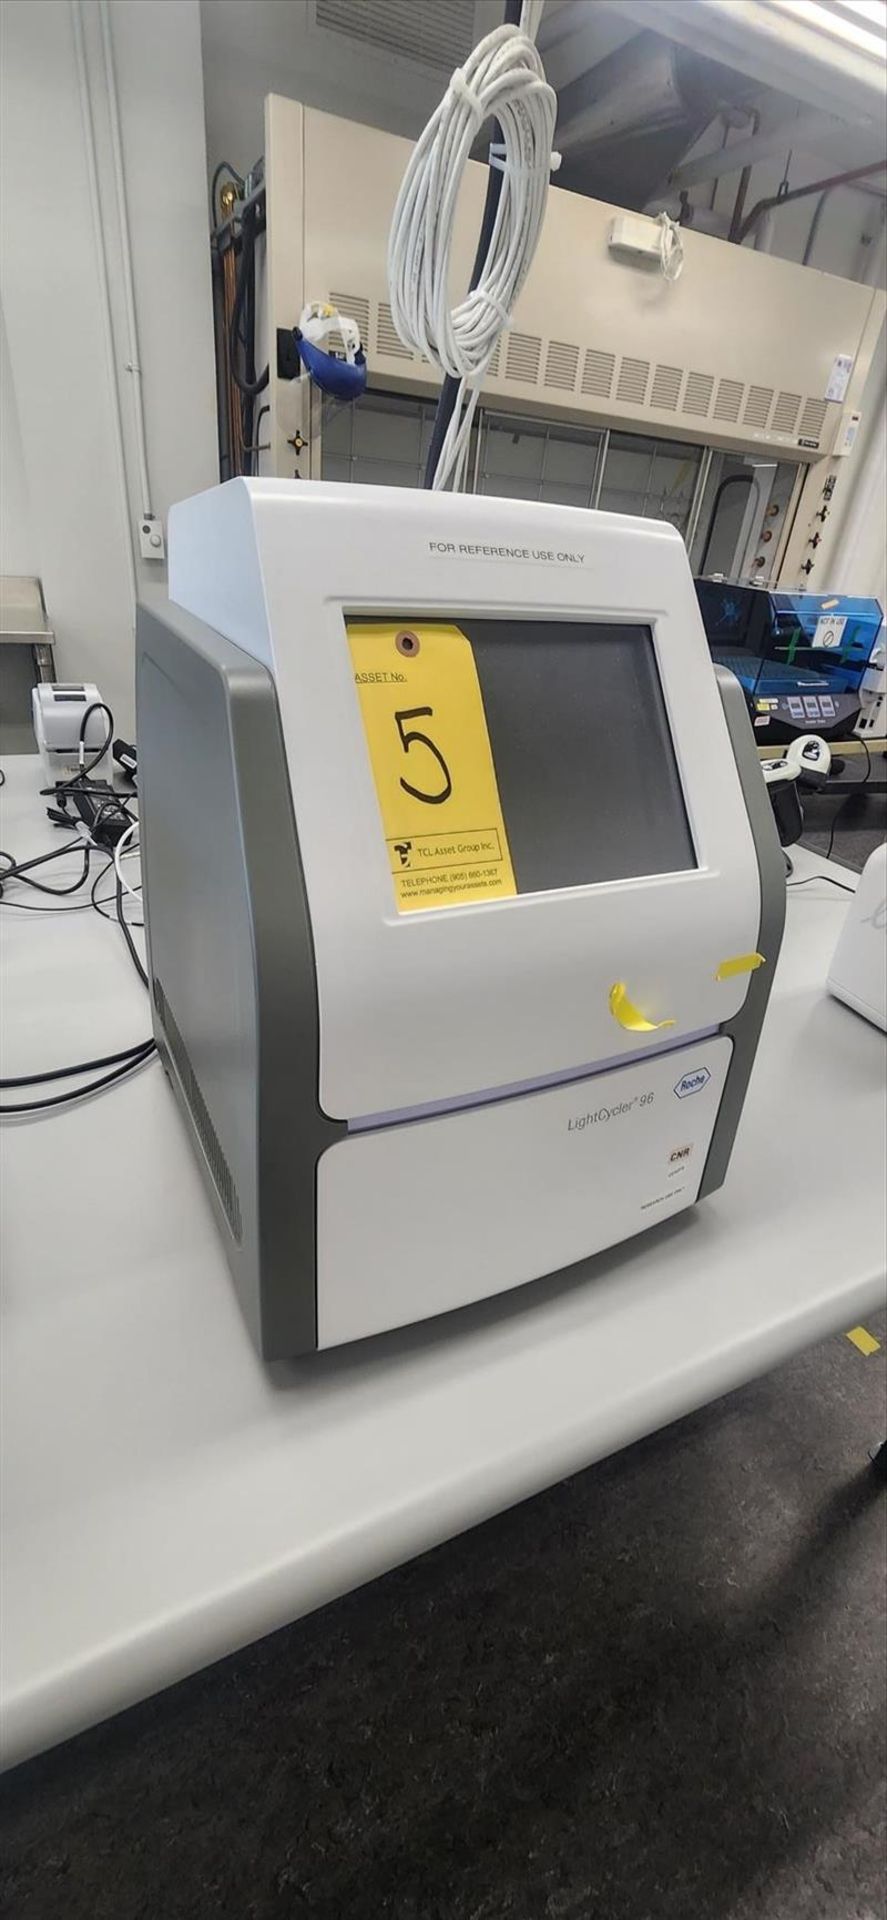 Roche LightCycler 96 Real-Time PCR Instrument, S/N 12383